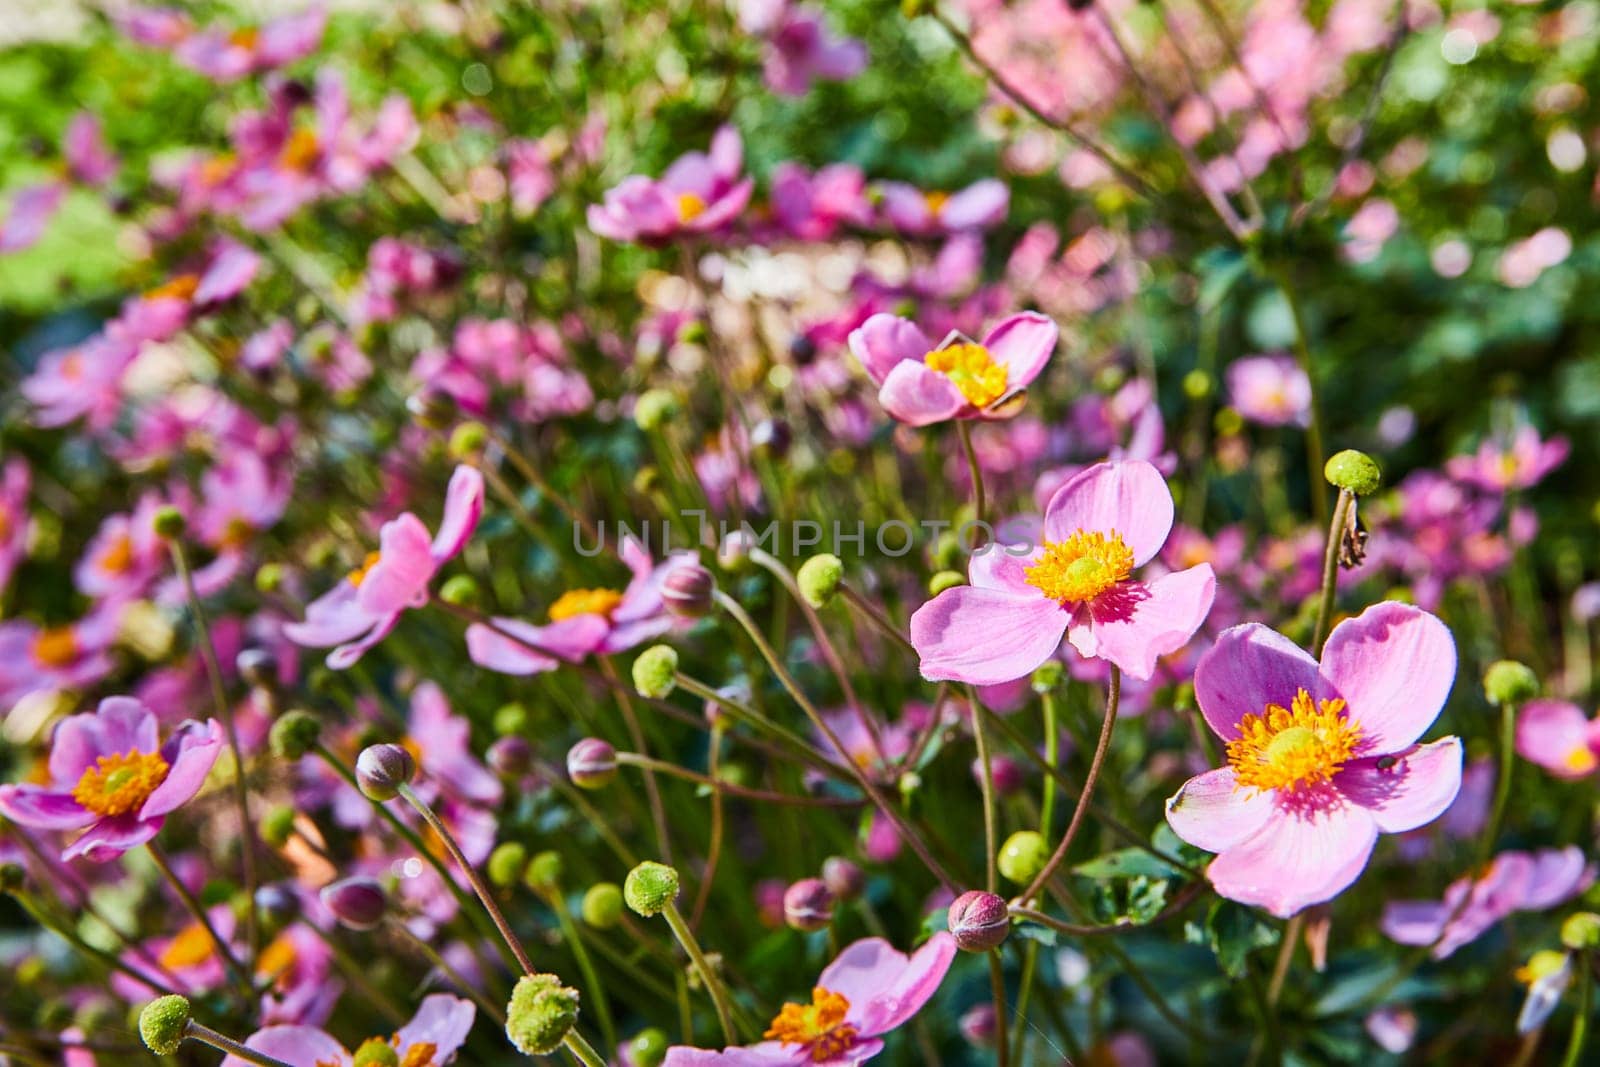 Vibrant Spring Anemones Blooming in Elkhart Indiana Botanic Gardens, 2023 - A Serene Floral Display with Pink Petals and Yellow Centers